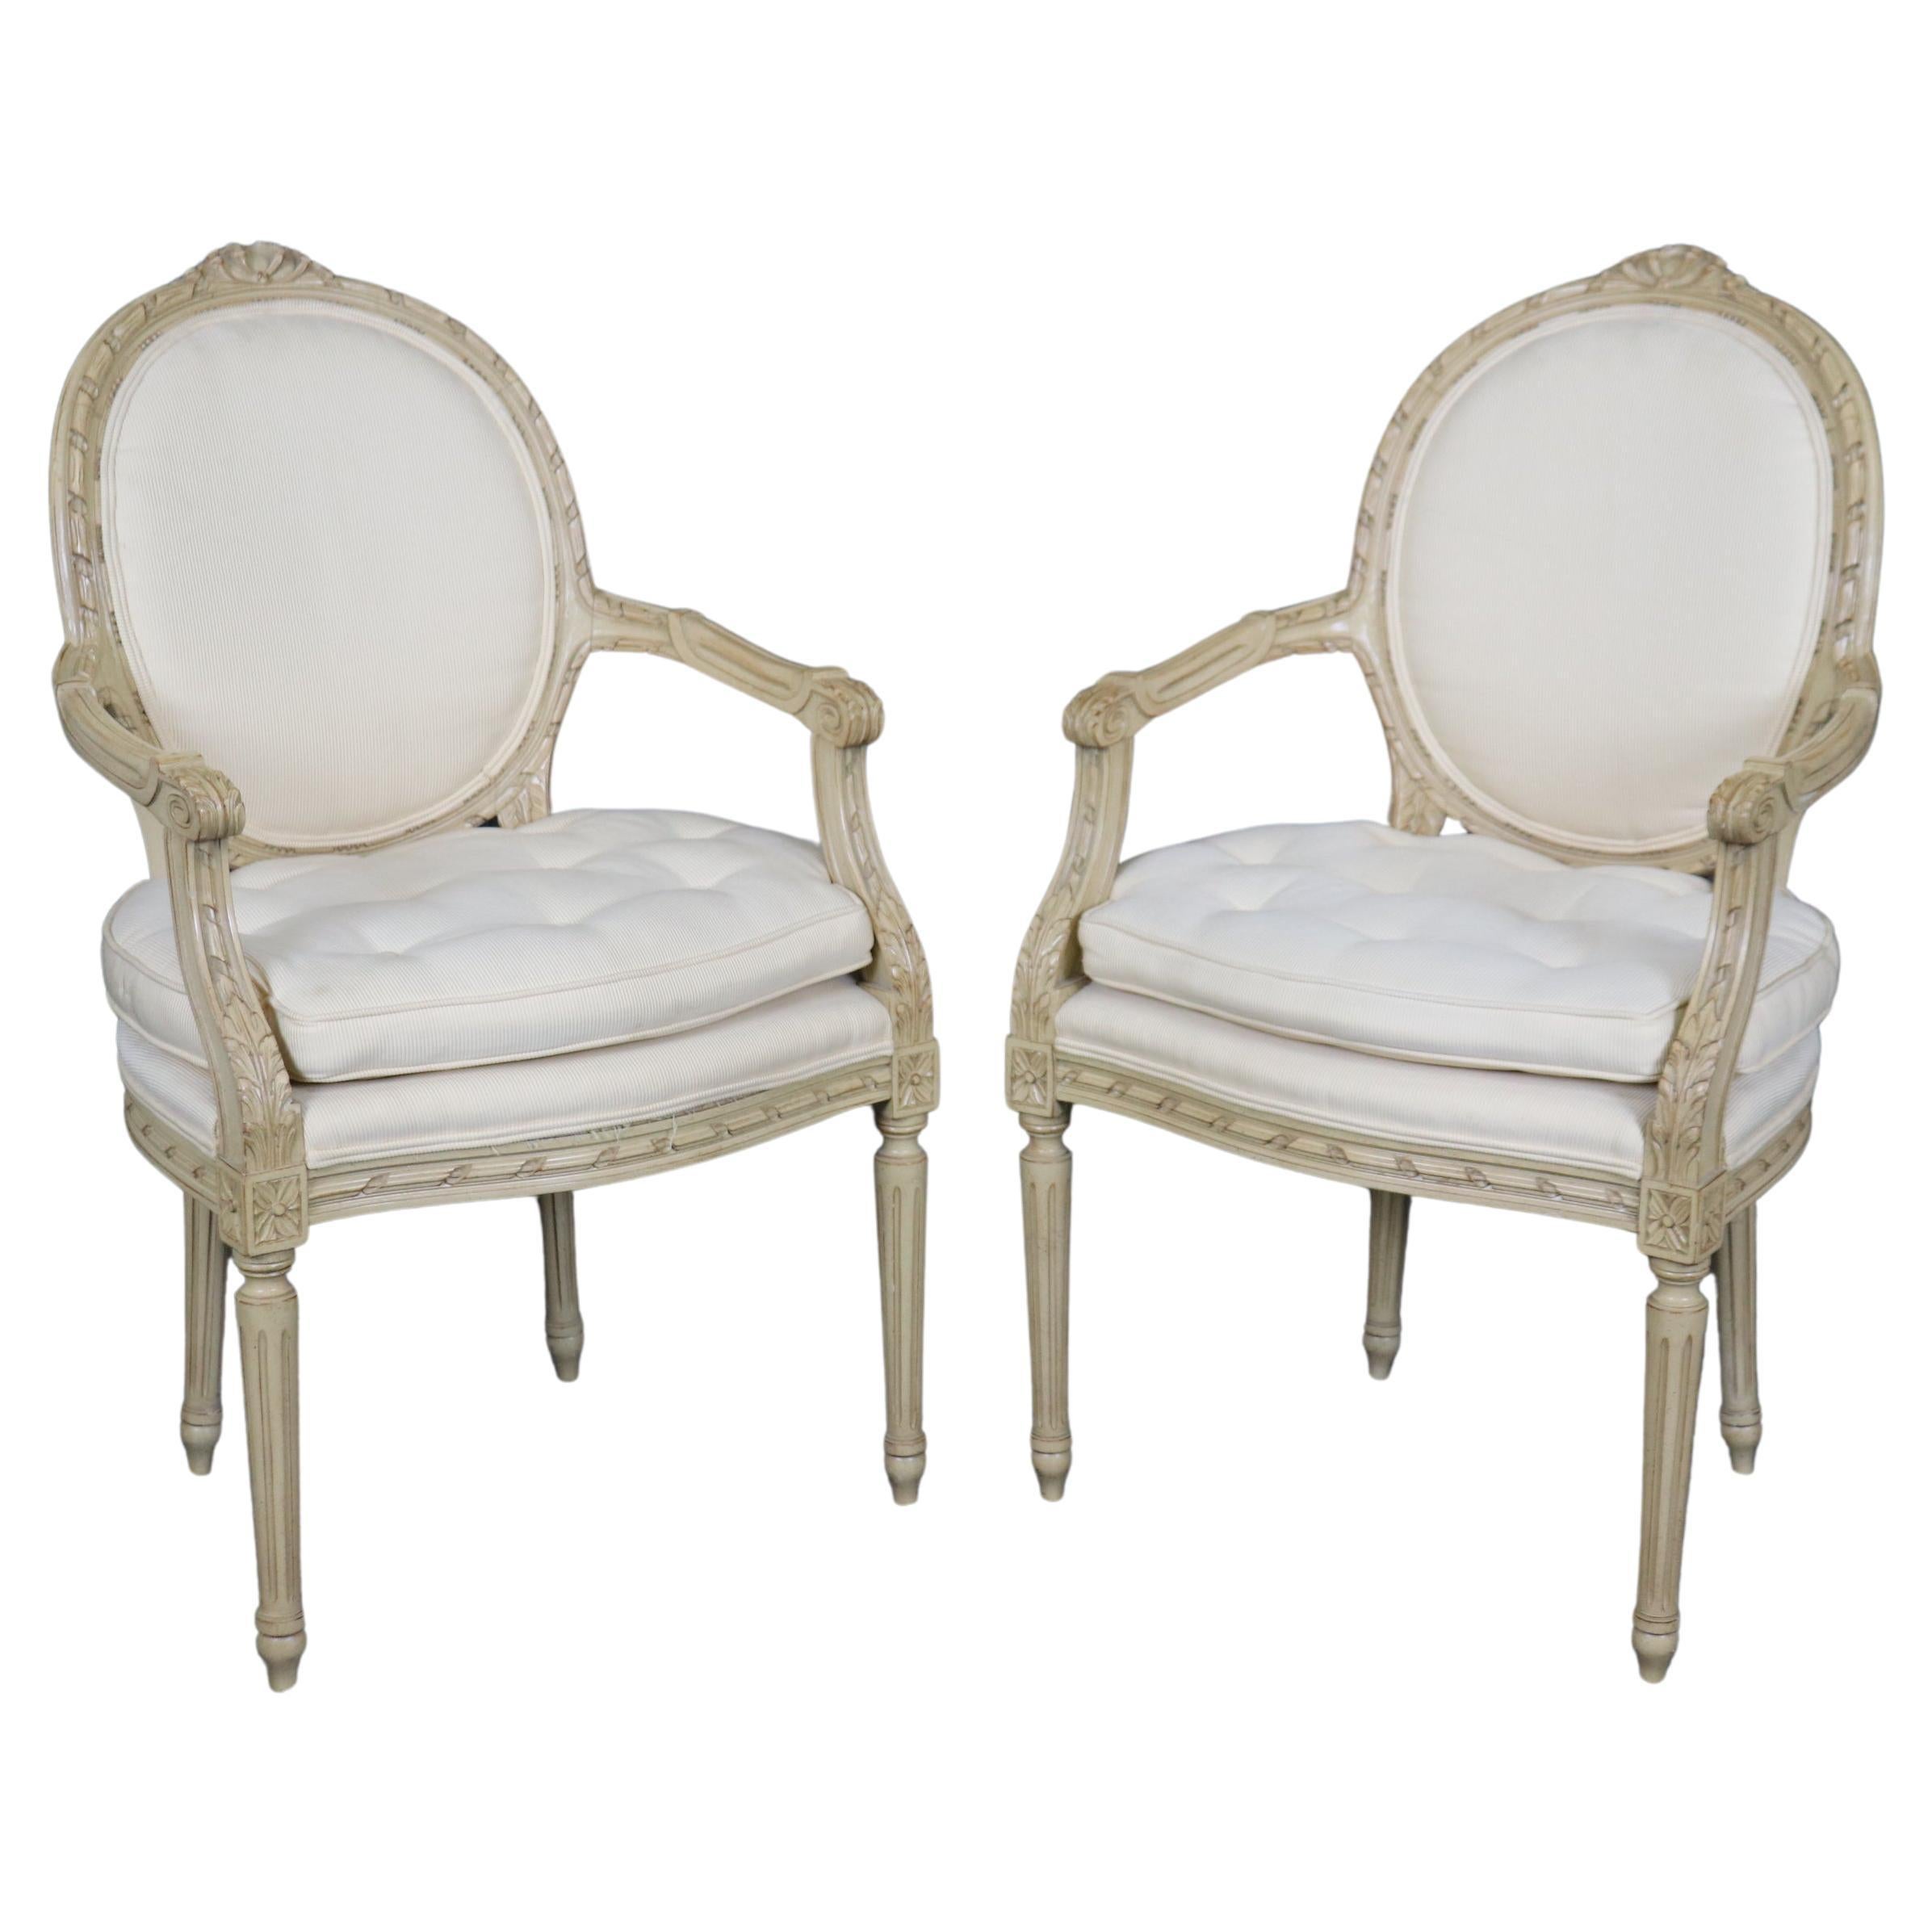 Fantastic Pair Distressed Creme Painted Hand-Carved French Louis XVI Armchairs For Sale